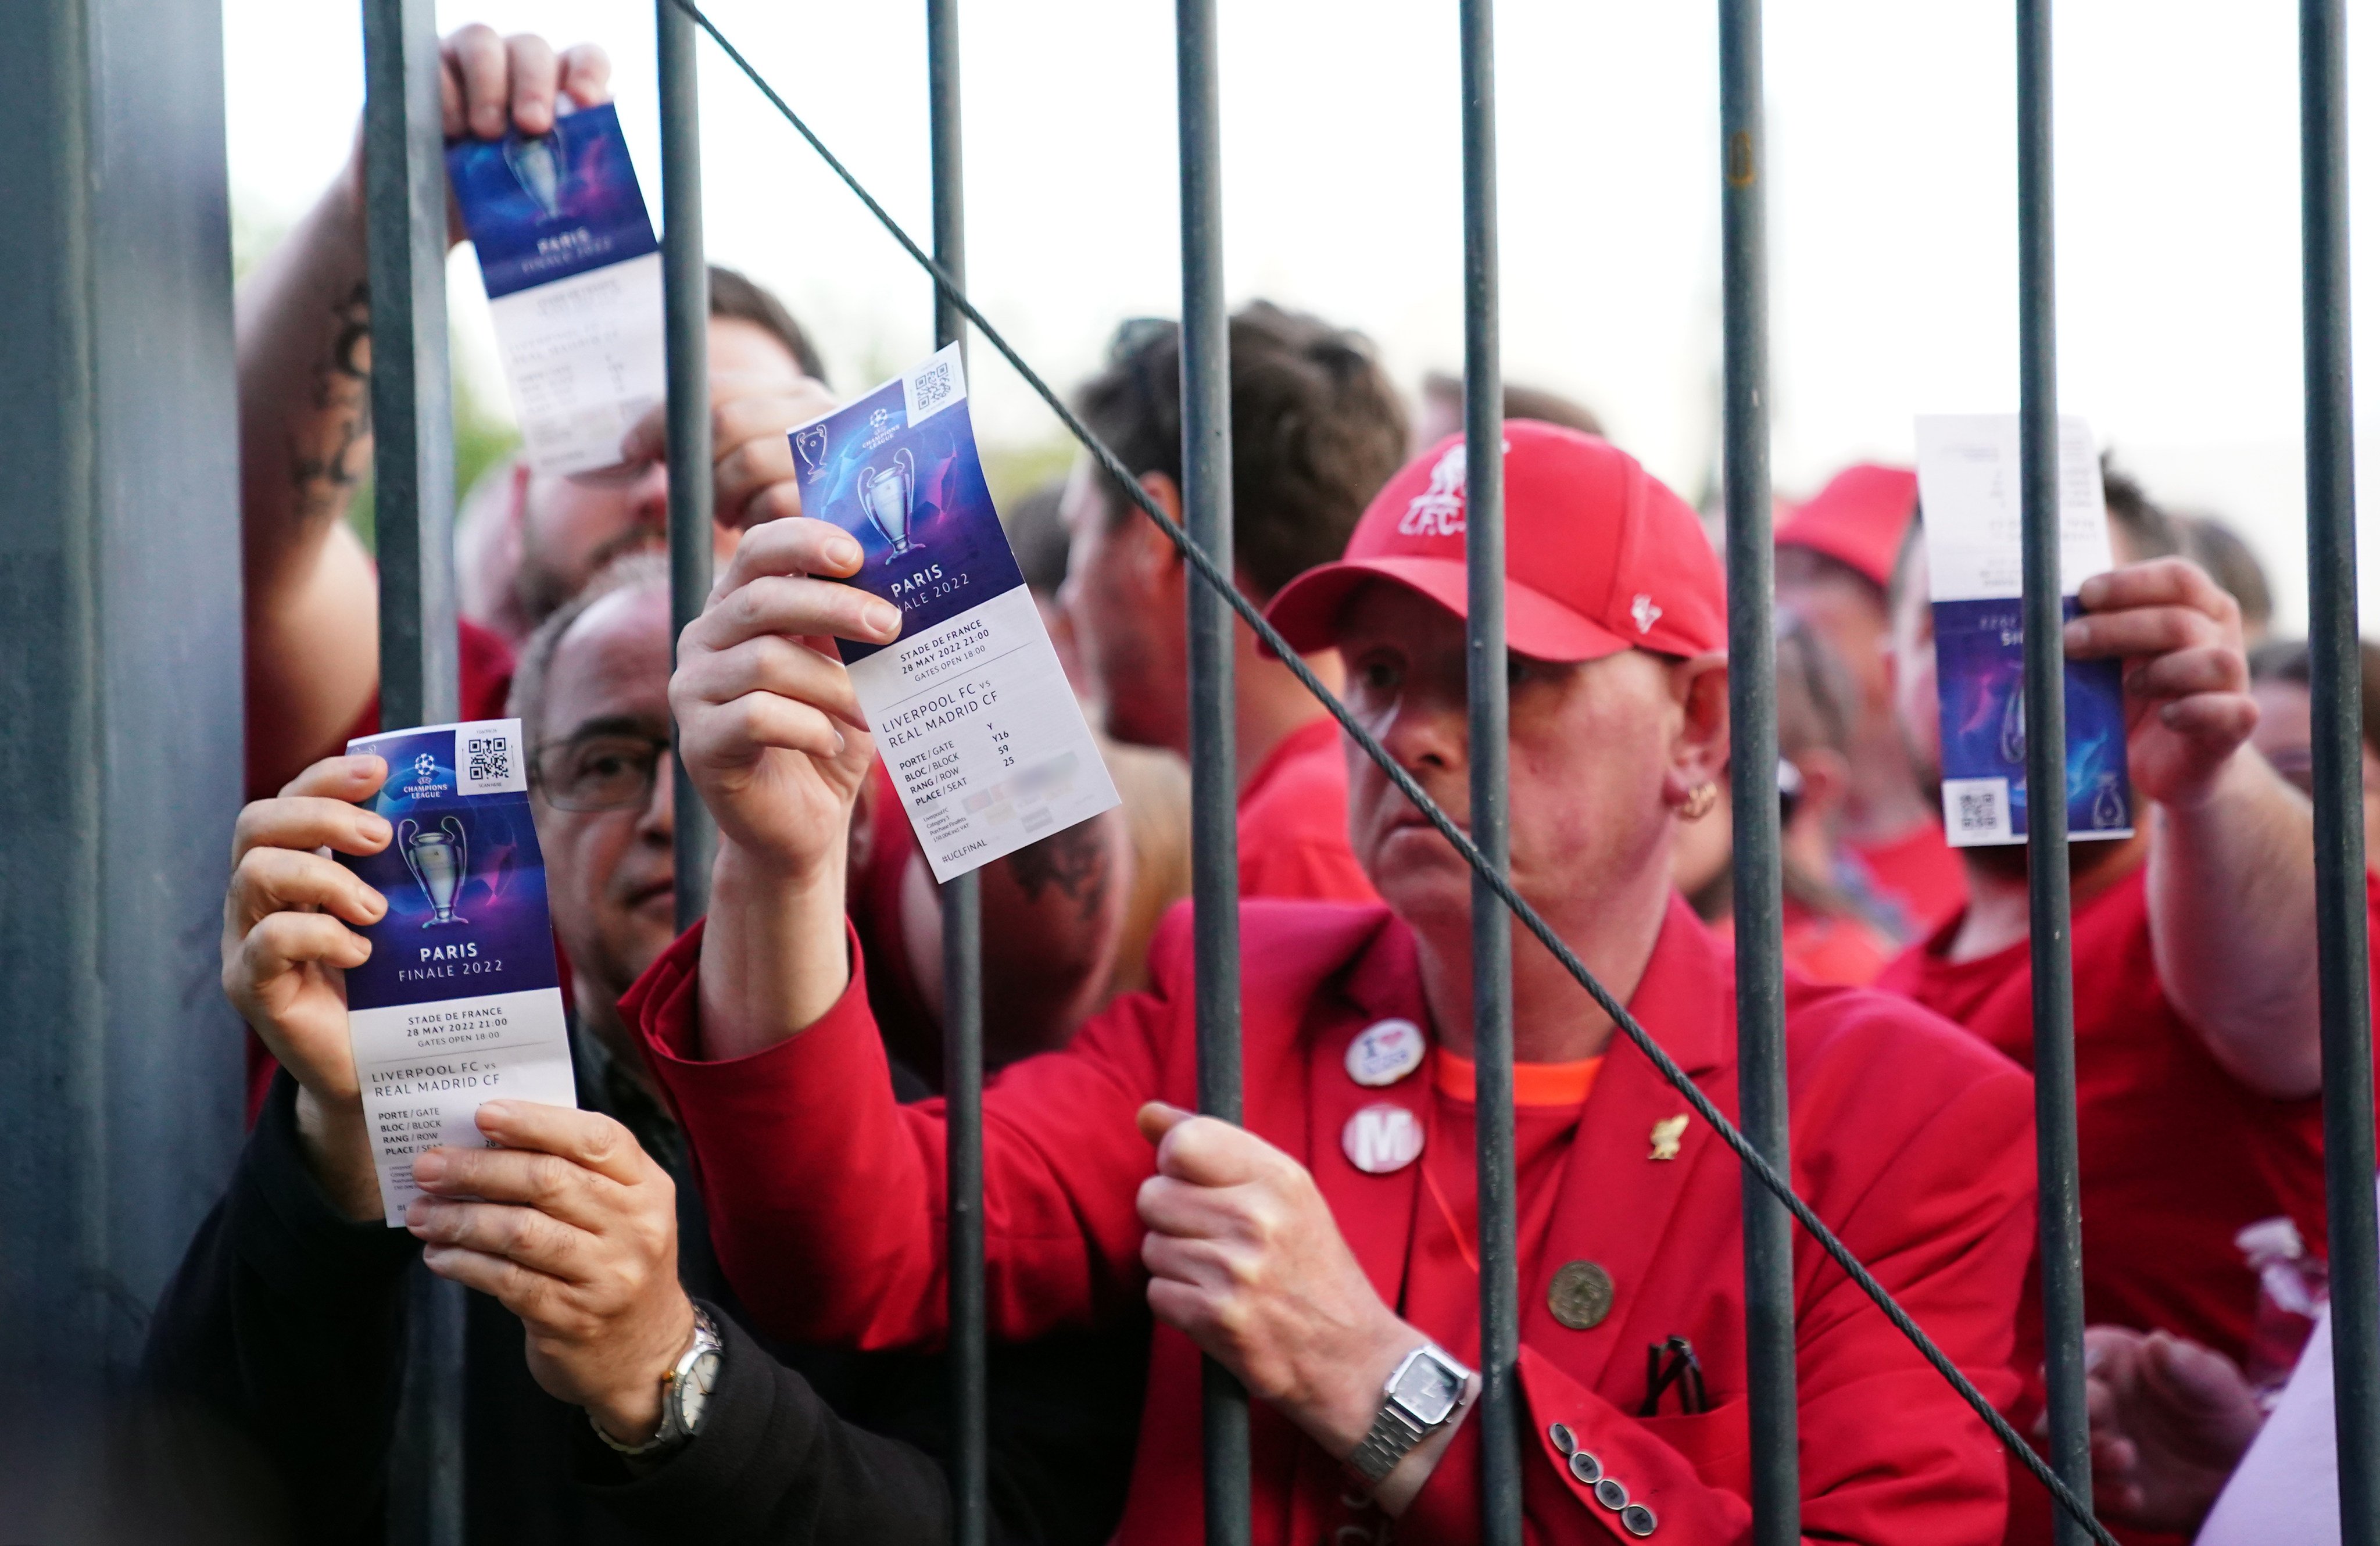 Liverpool fans stuck outside the ground as they show their match tickets before the Uefa Champions League final between Liverpool and Real Madrid at the Stade de France in Paris on May 28. Photo: PA Wire / DPA